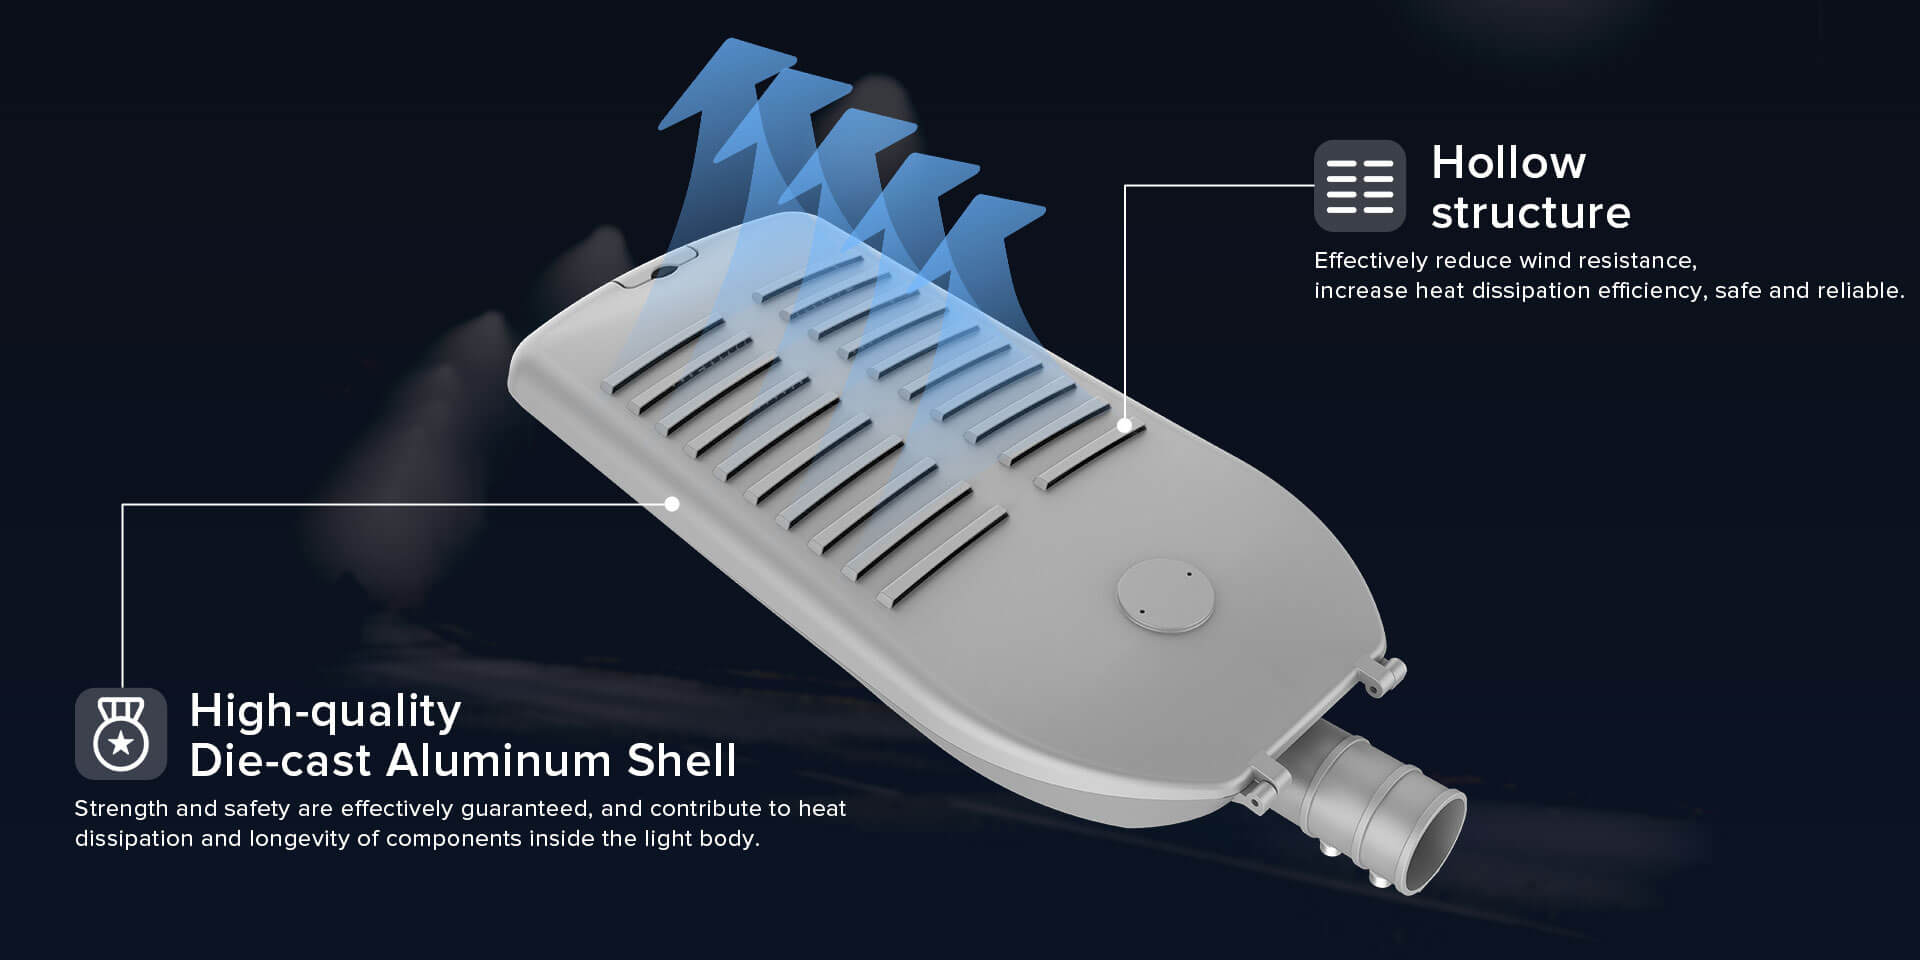 High-qualityDie-cast Aluminum Shell and hollow structure，increase heat dissipation efficiency, safe and reliable.